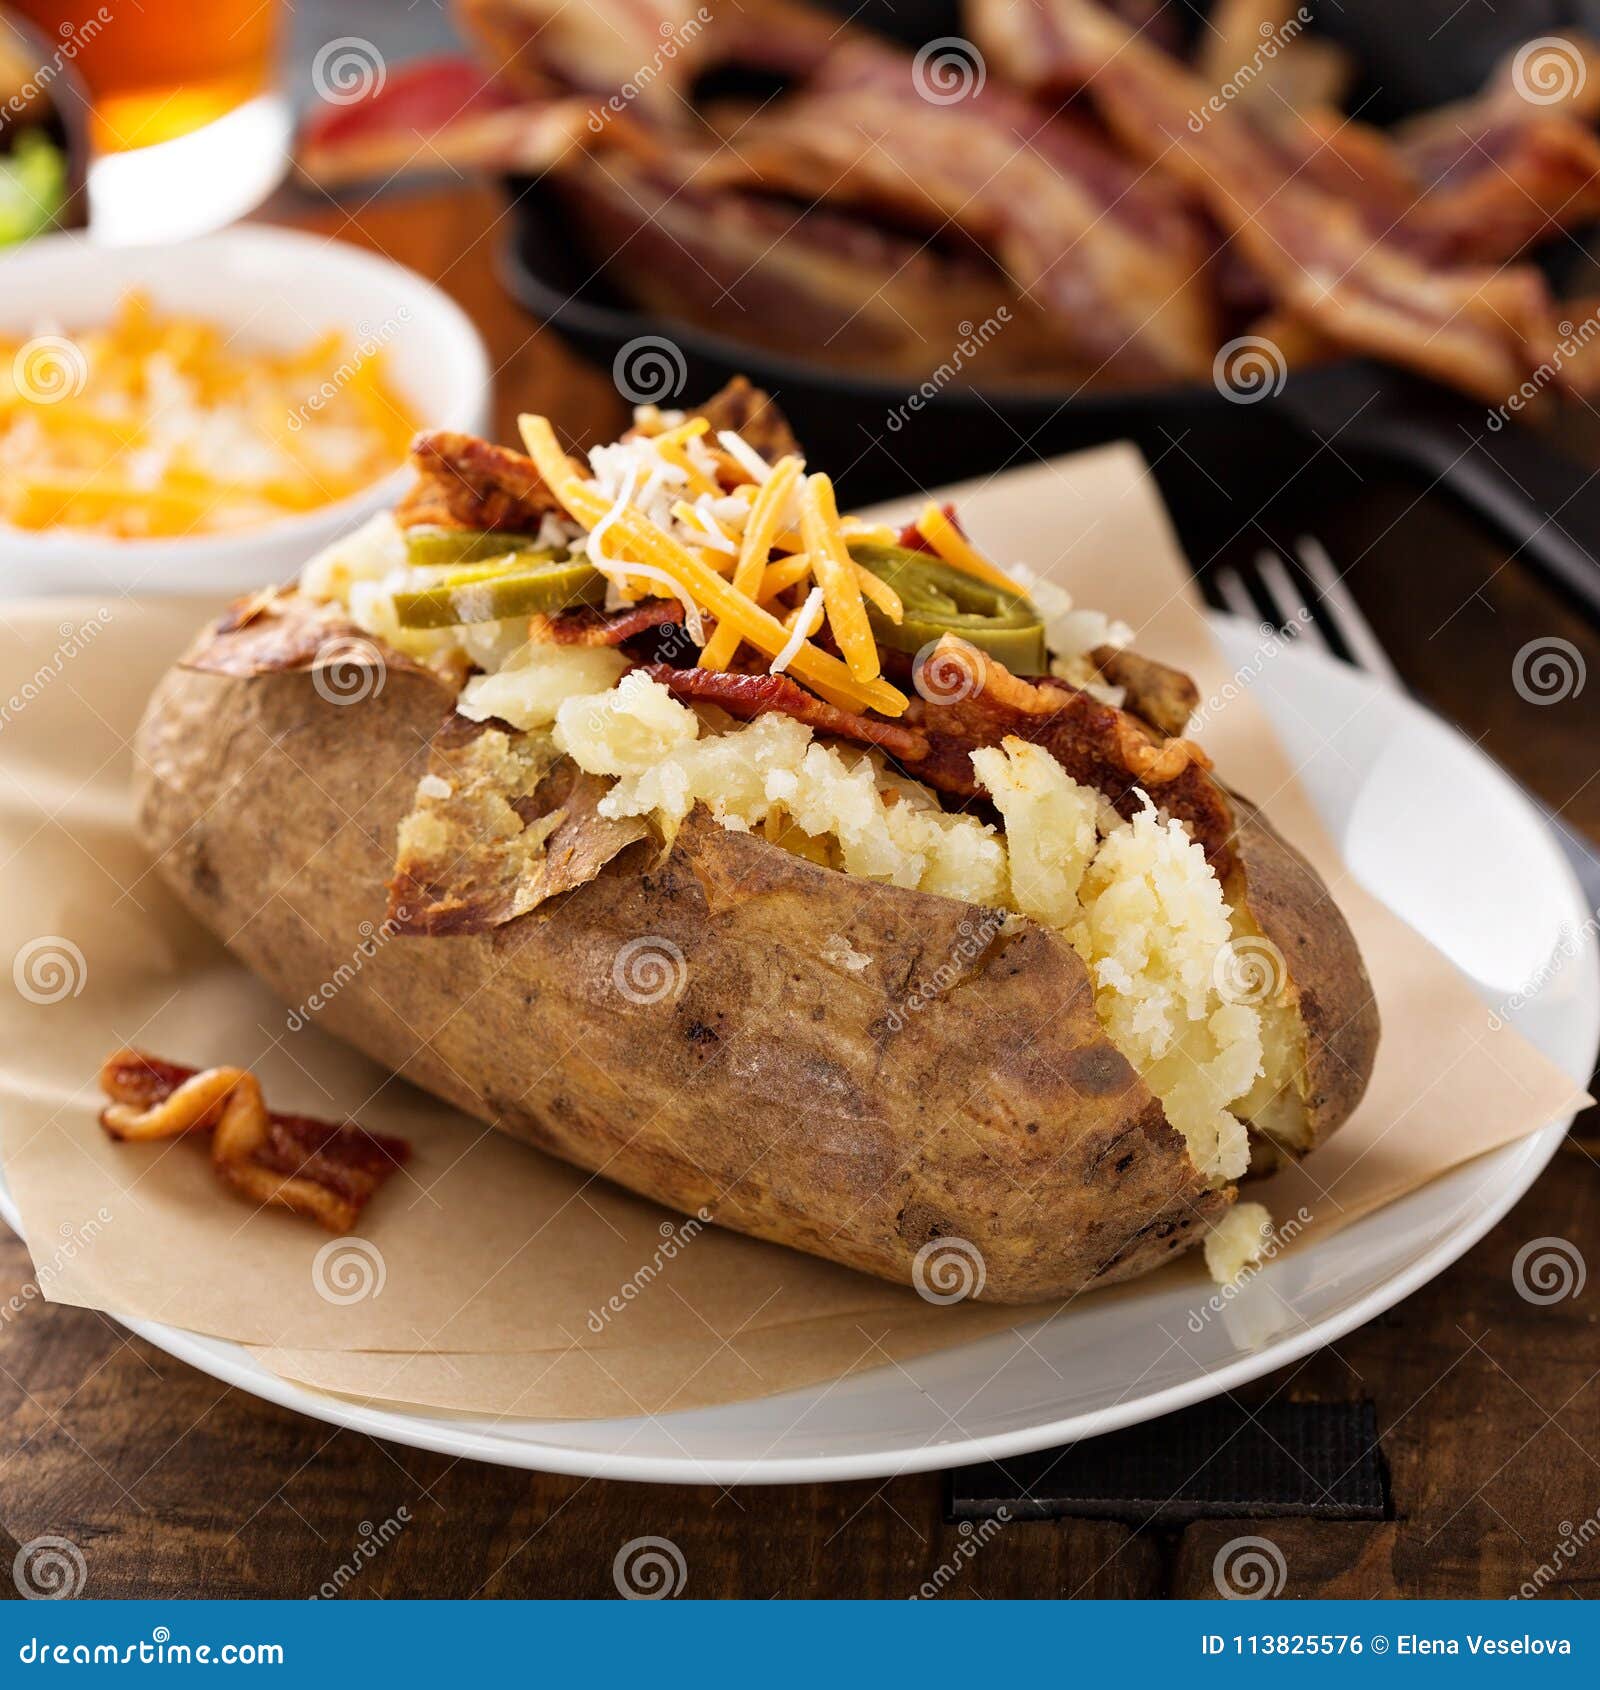 loaded baked potato with bacon and cheese